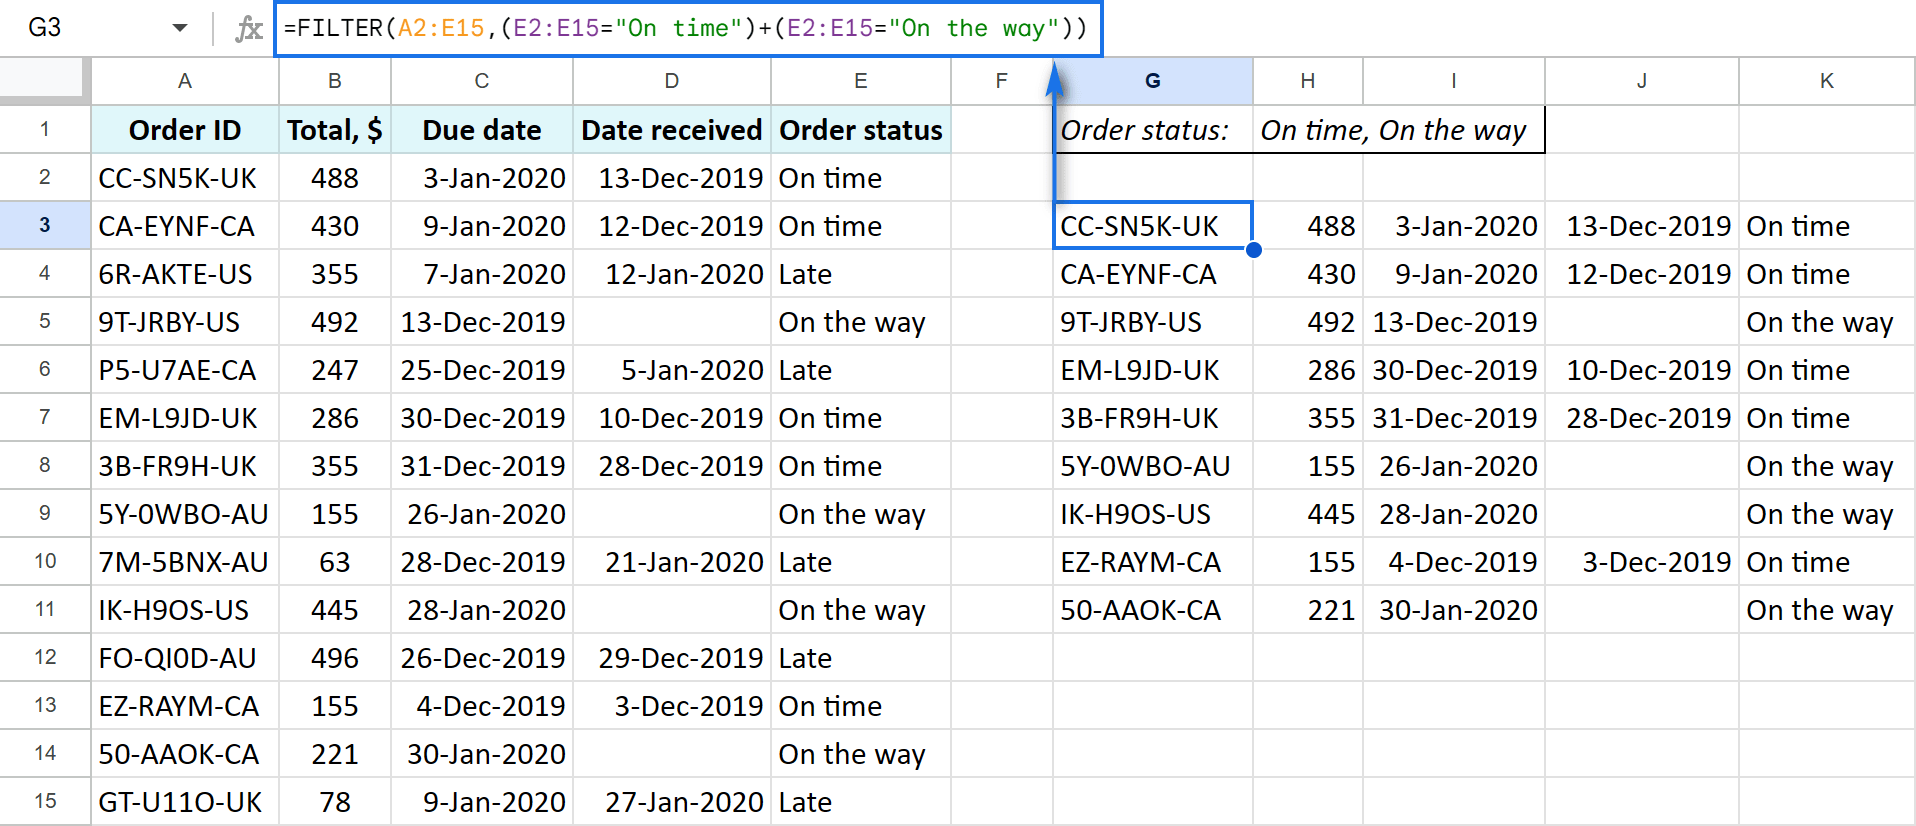 Google Sheets FILTER function for OR condition.